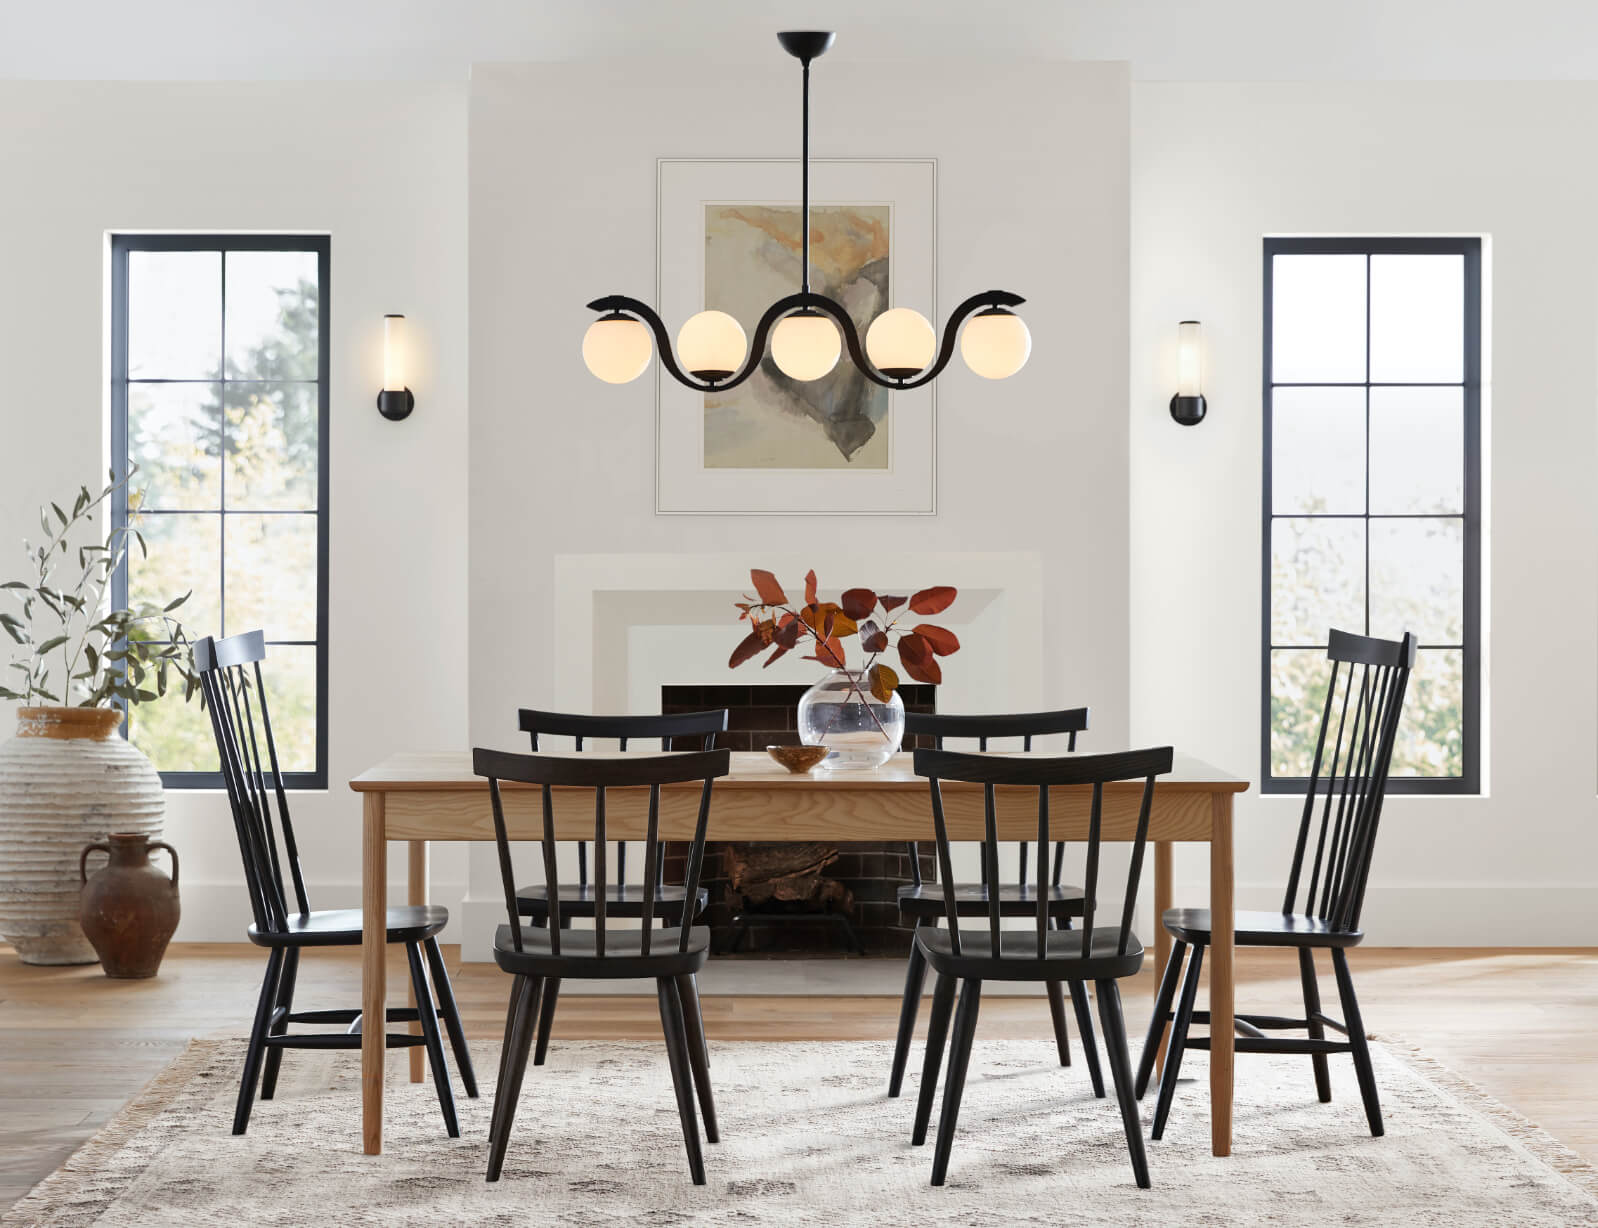 How To Choose Dining Room Lighting, What Size Linear Light Fixture For Dining Room Table